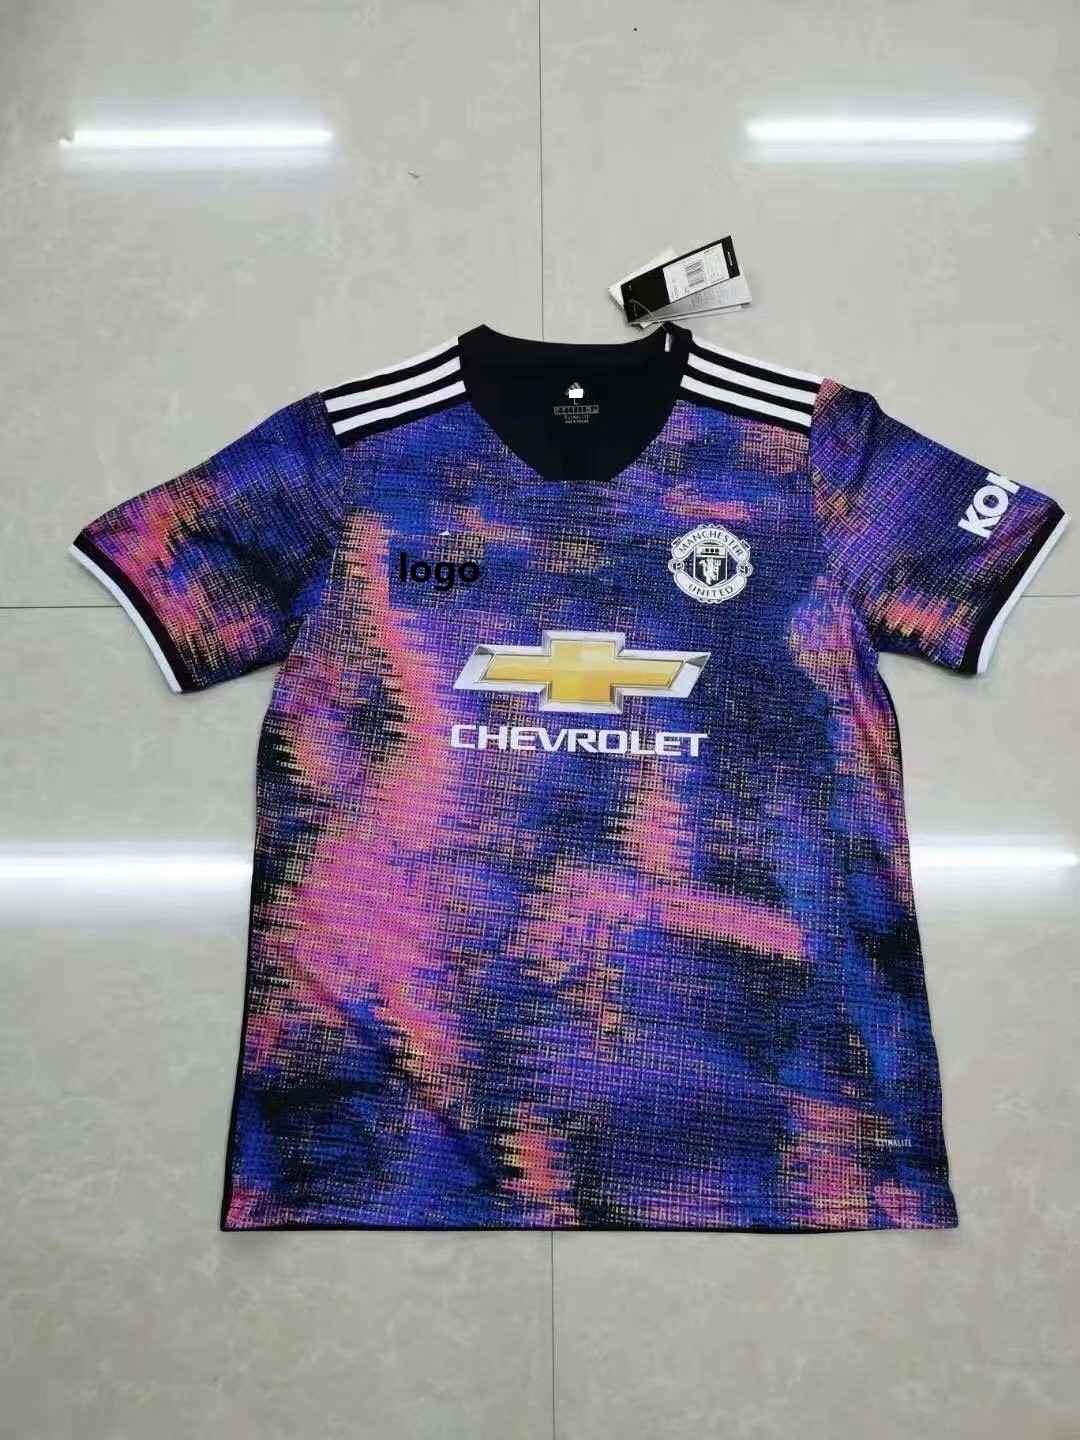 2019-20 Thai Quality adult Manchester United Soccer jersey football shirt